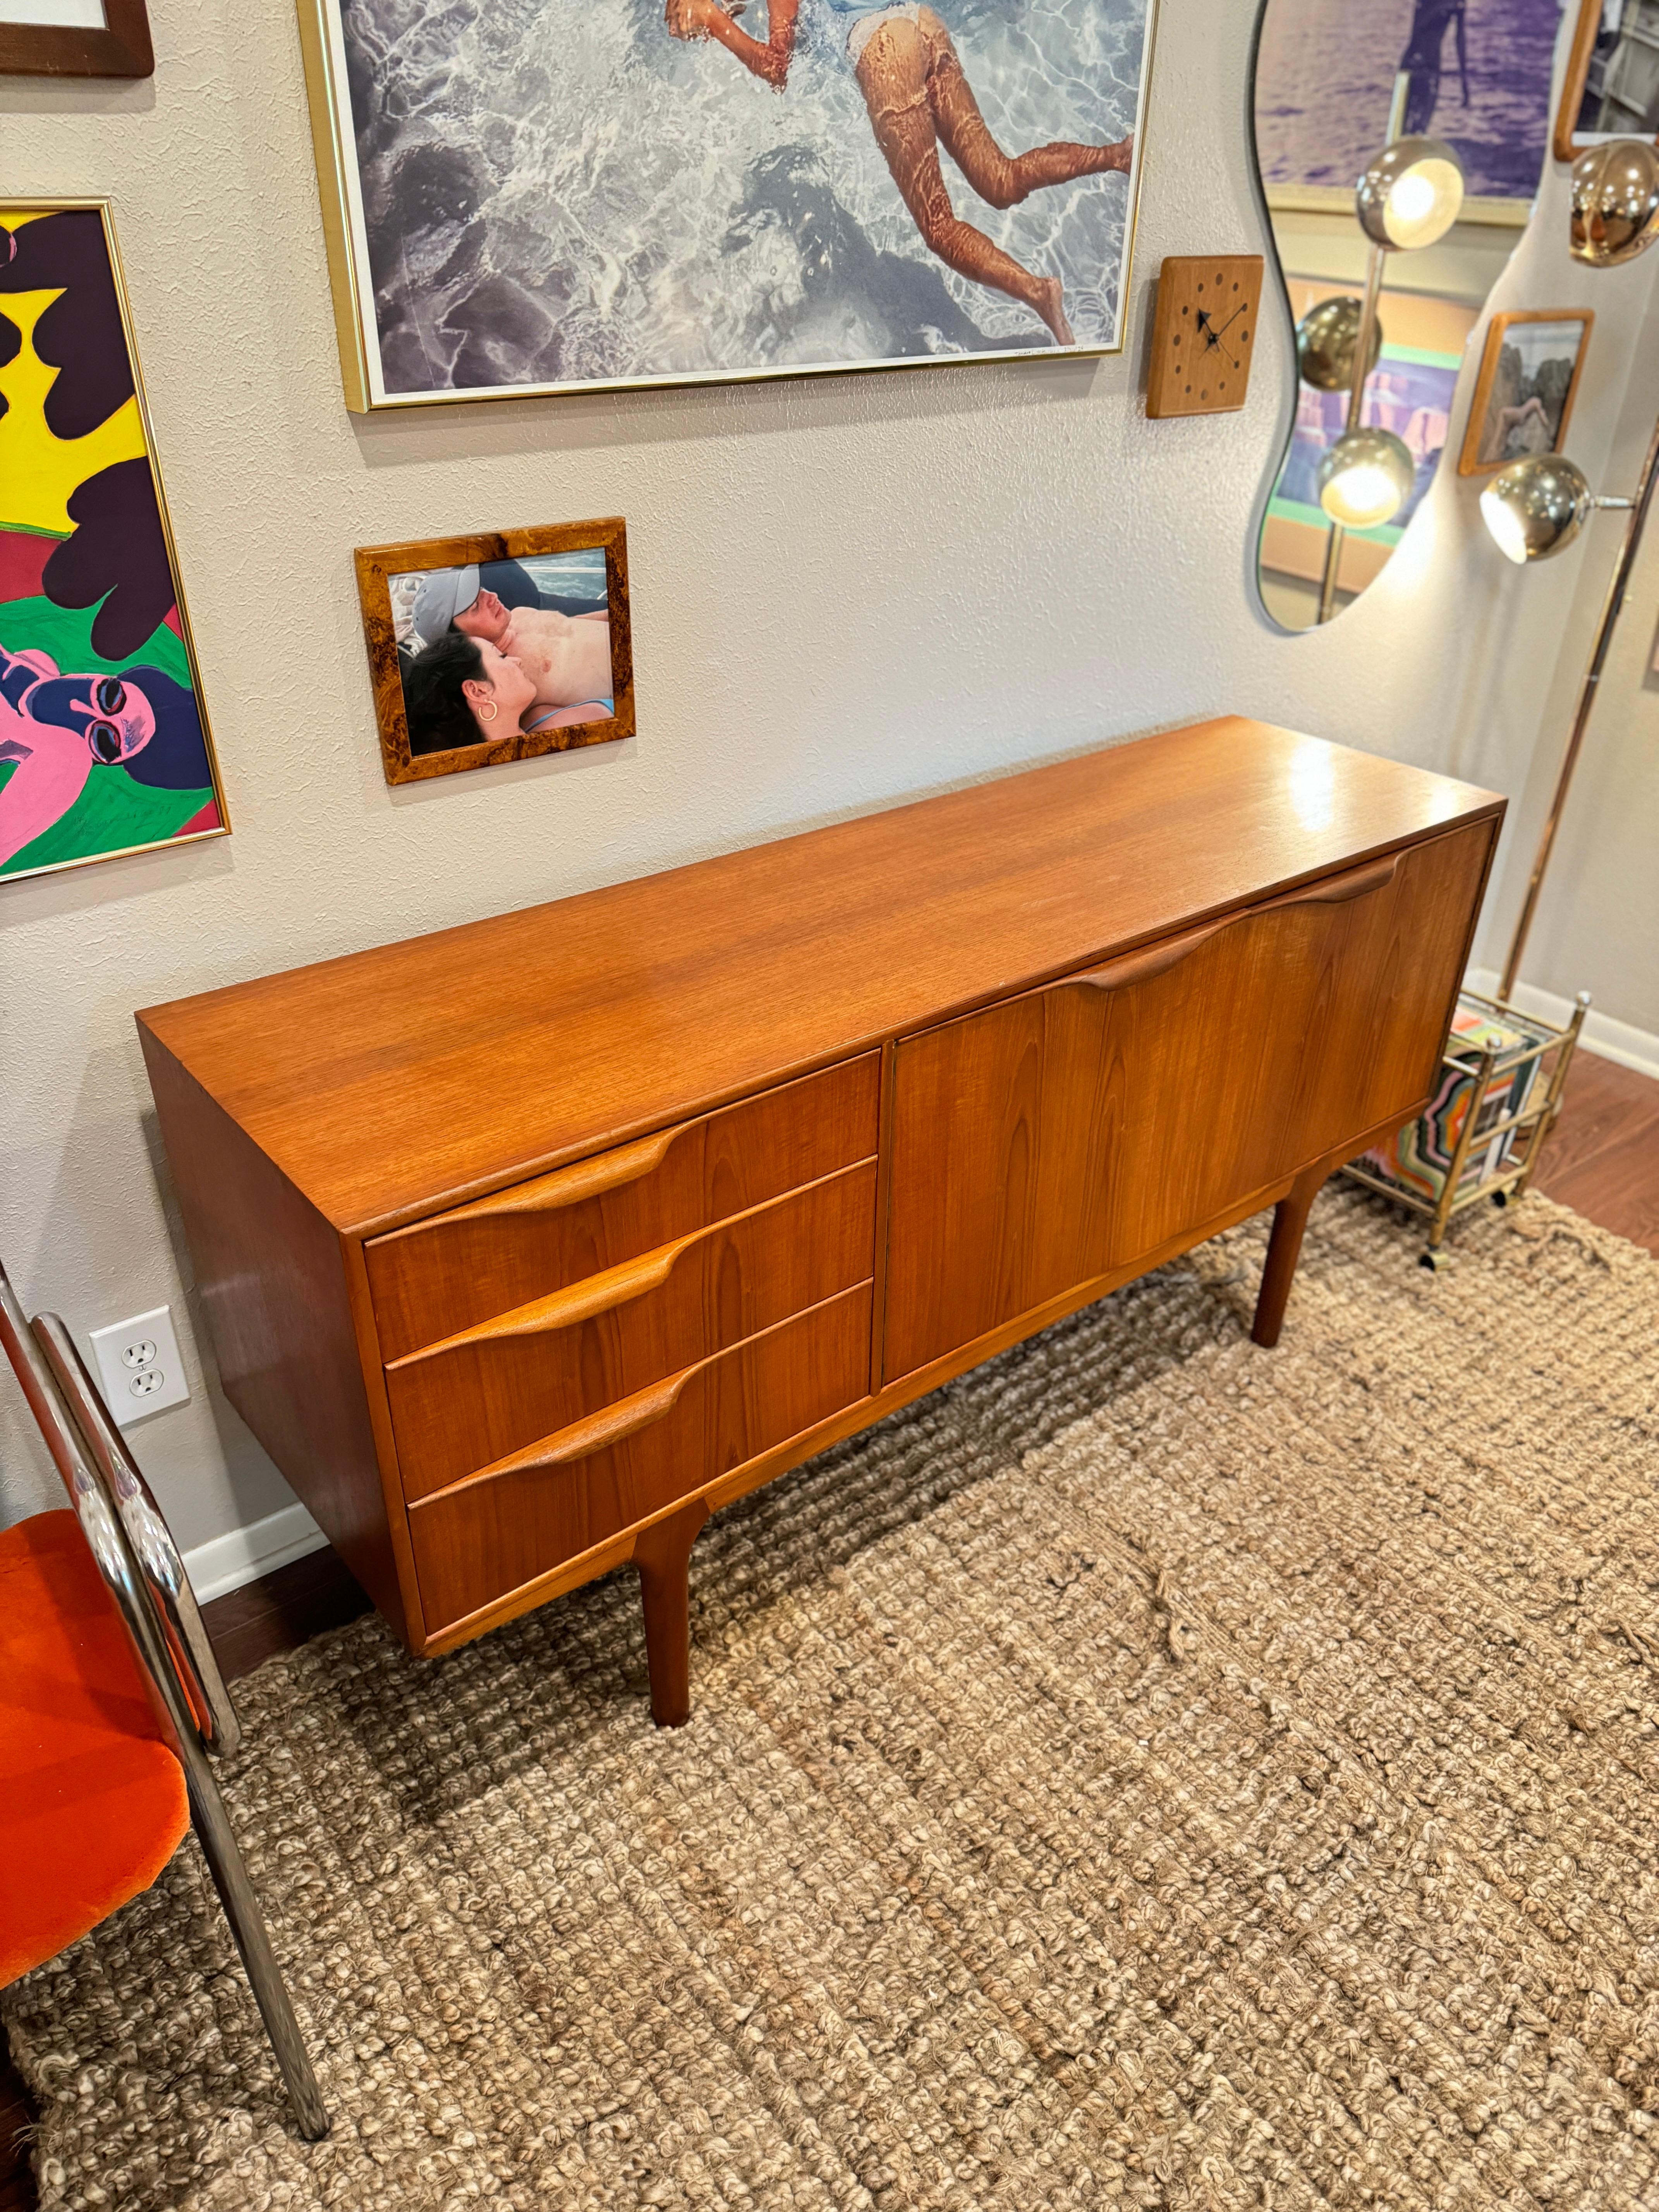 Vintage mid century modern sideboard with folded handles made by McIntosh 8